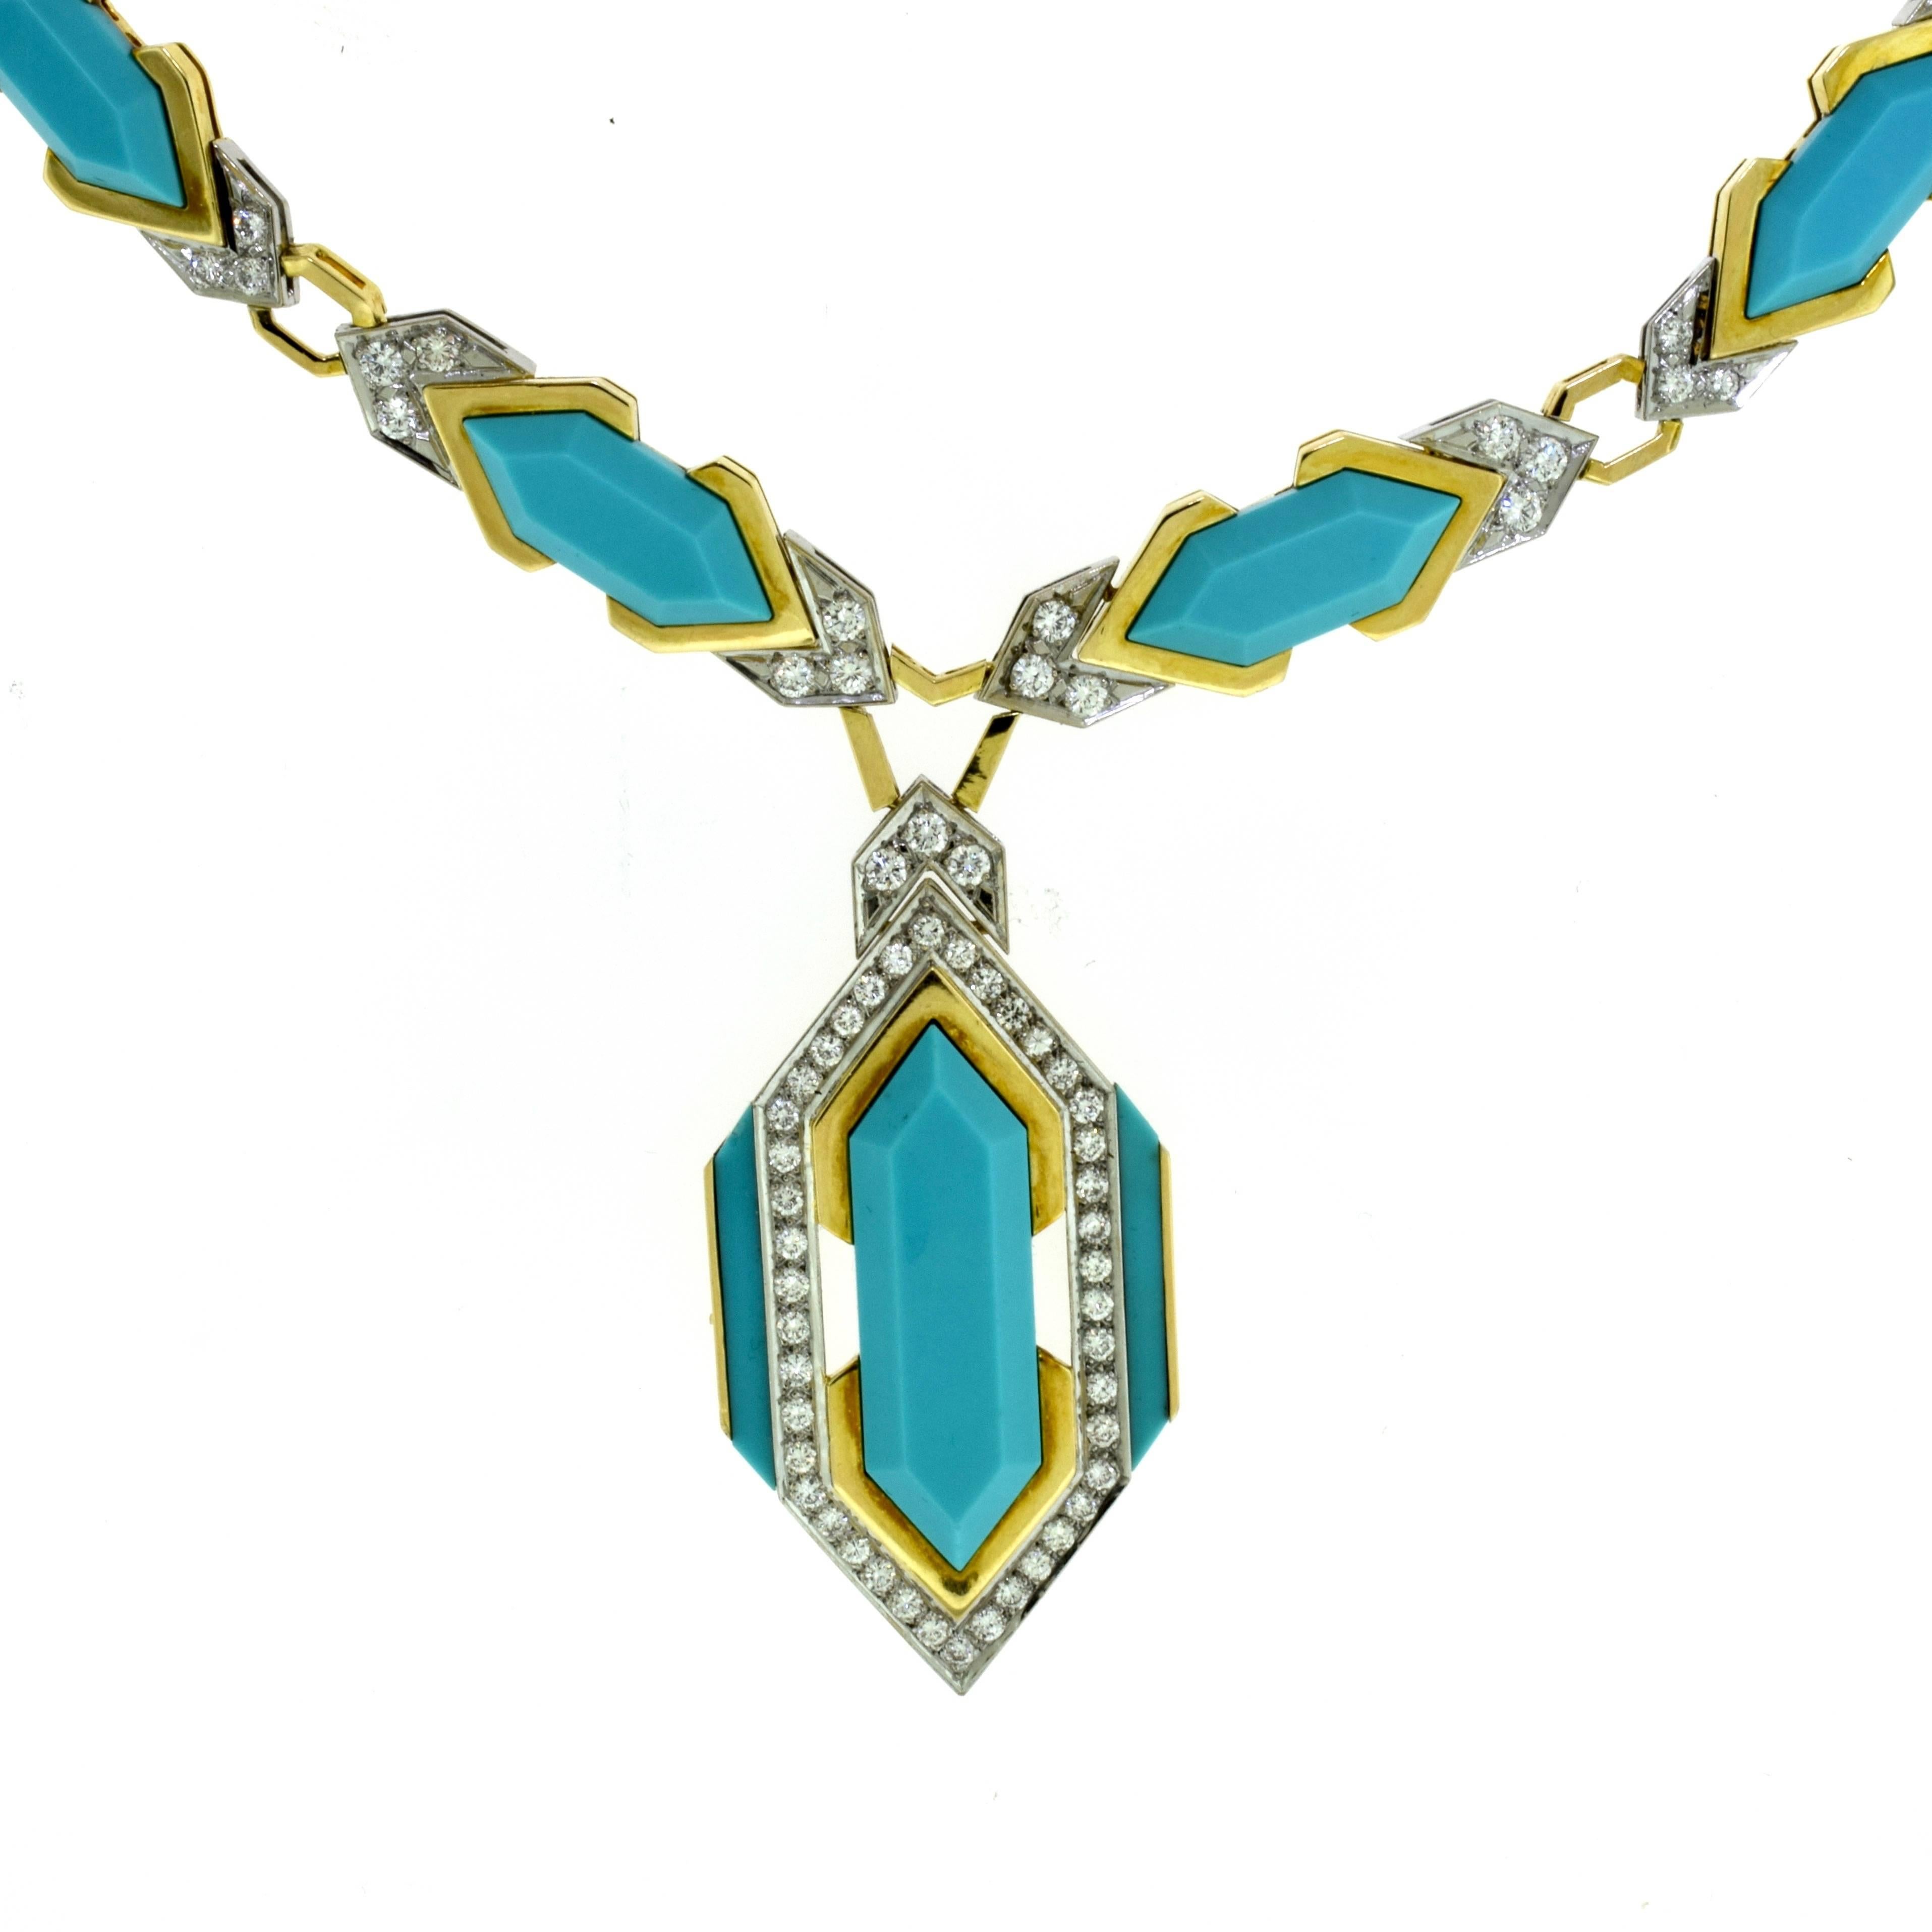 Metal: 18 Karat Yellow Gold
Stones: Pressed Turquoise, Round Brilliant Cut Diamonds
Total Diamond Carat Weight: 11 ct
Color Grade: F - G
Clarity Grade: VVS - VS
 
Necklace:
Necklace Length: approx. 18 inches
Pendant Dimensions: 2.75 x 1.30